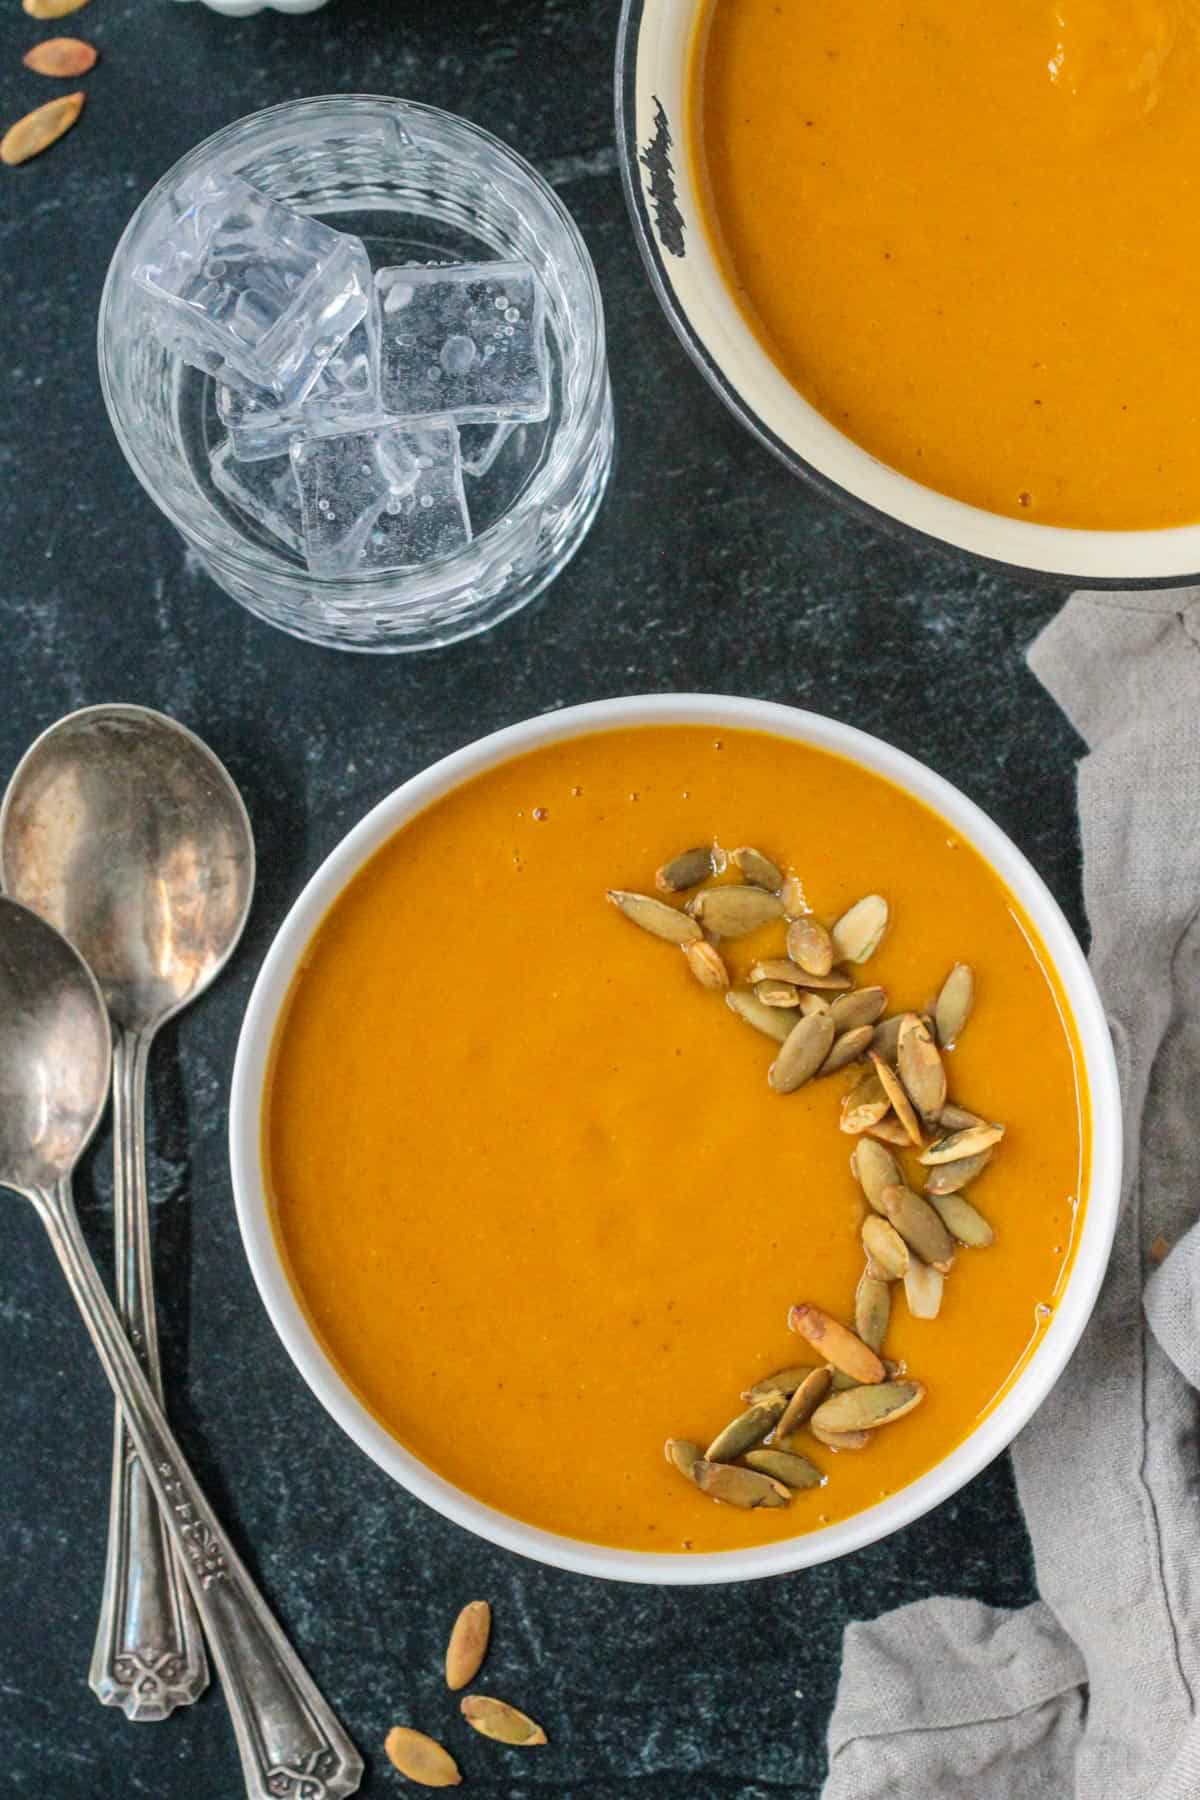 Bowl of butternut squash soup garnished with roasted pumpkin seeds.